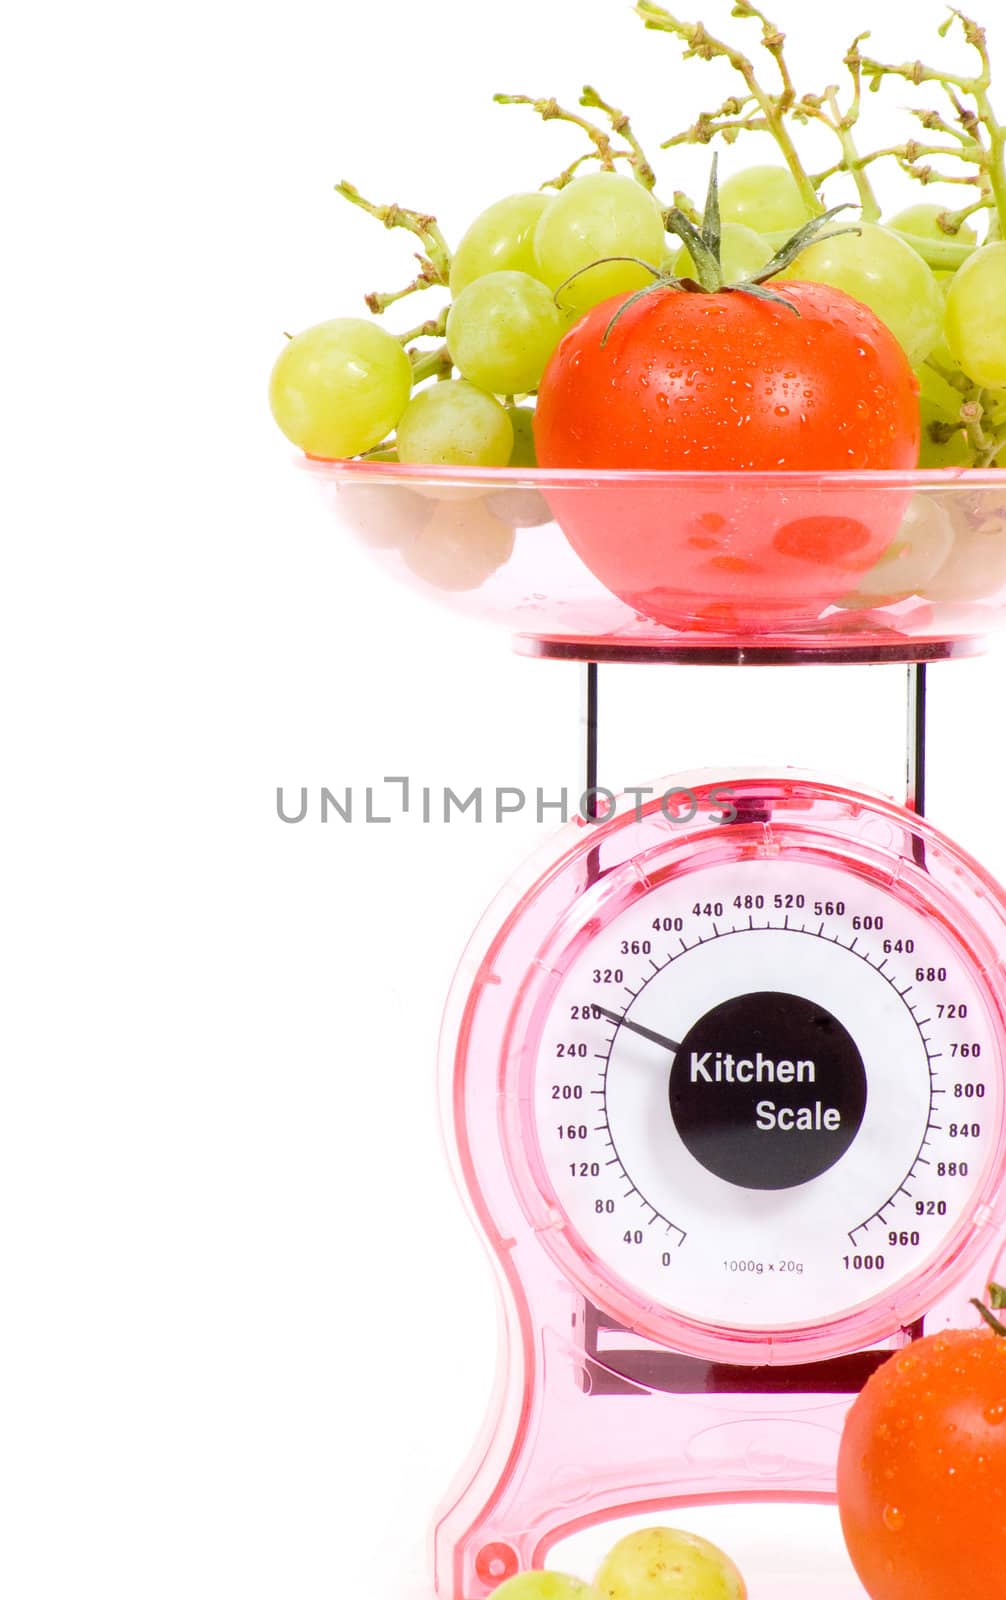 Kitchen Scales with fresh tomatoes and grapes  isolated over white